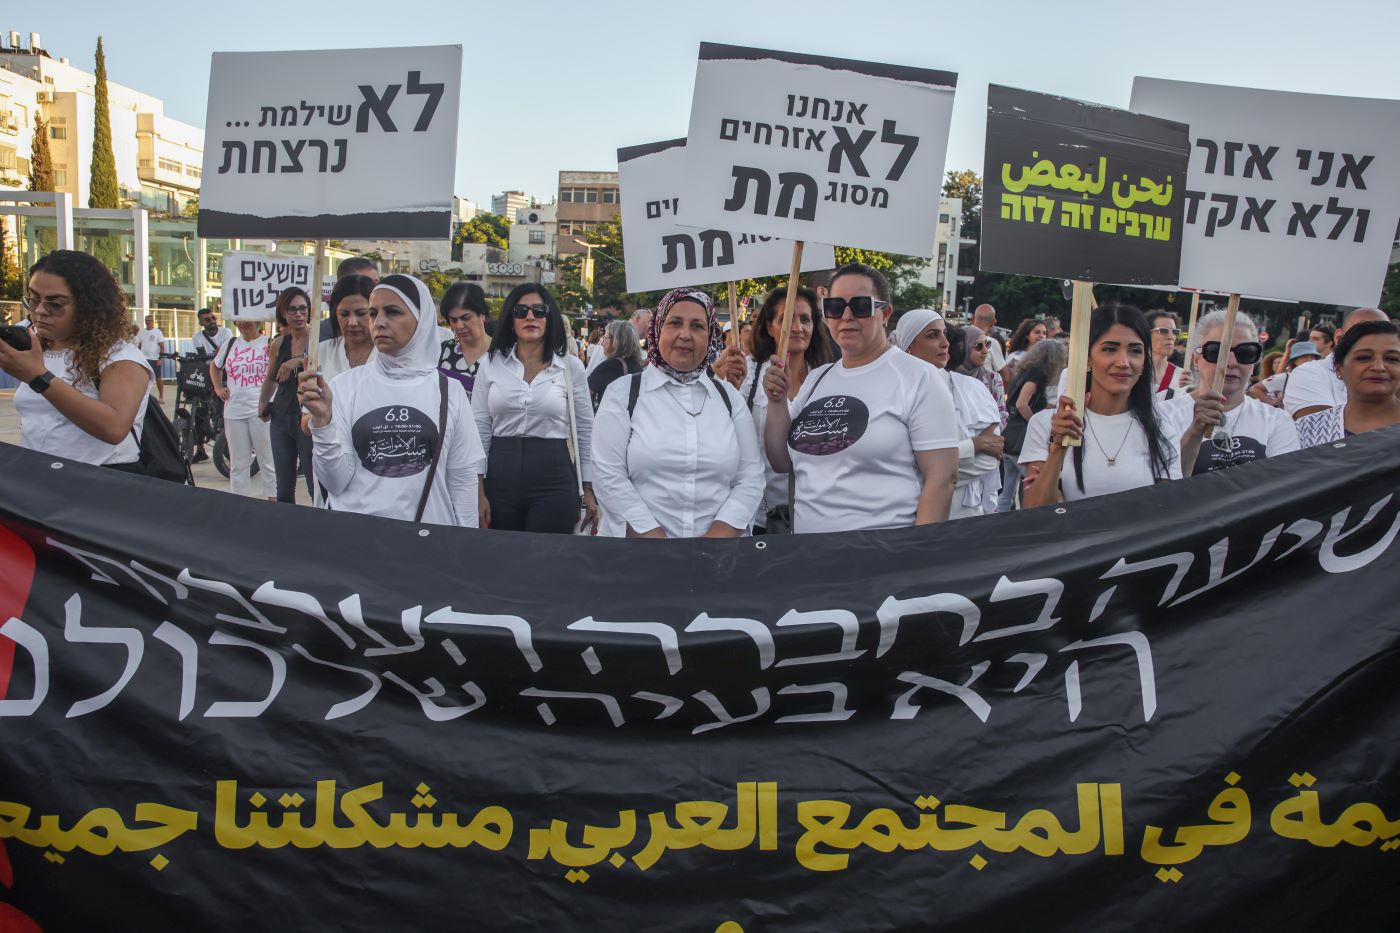 Protesters at the “March of the Dead” hold a banner that says “Crime in Arab society is all of our problem” (Photo: Kadia Levy).